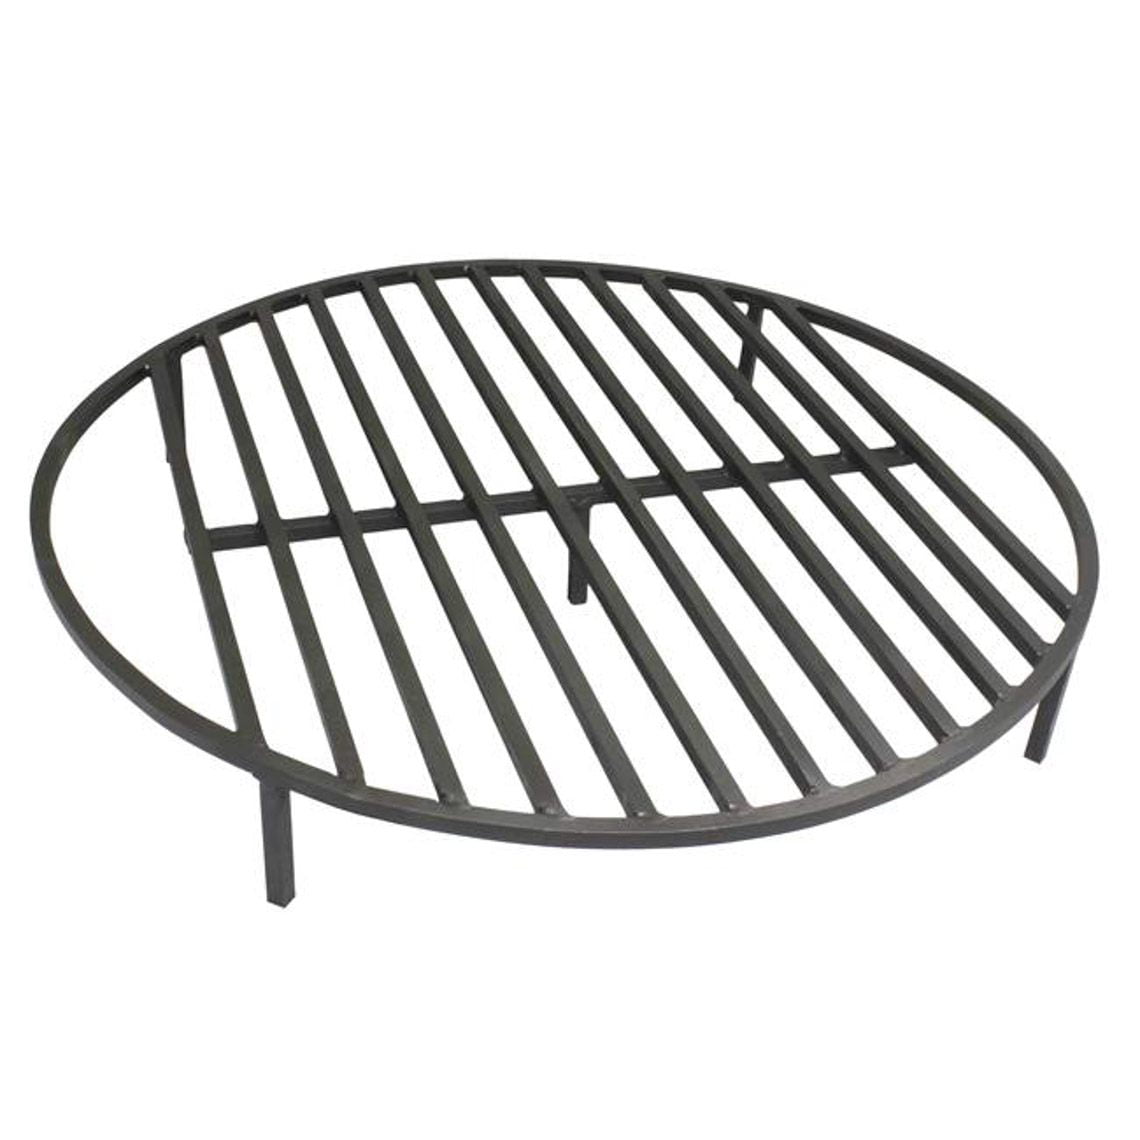 Round Fire Pit Grate 36 Heavy Duty, Stainless Steel Fire Pit Grate